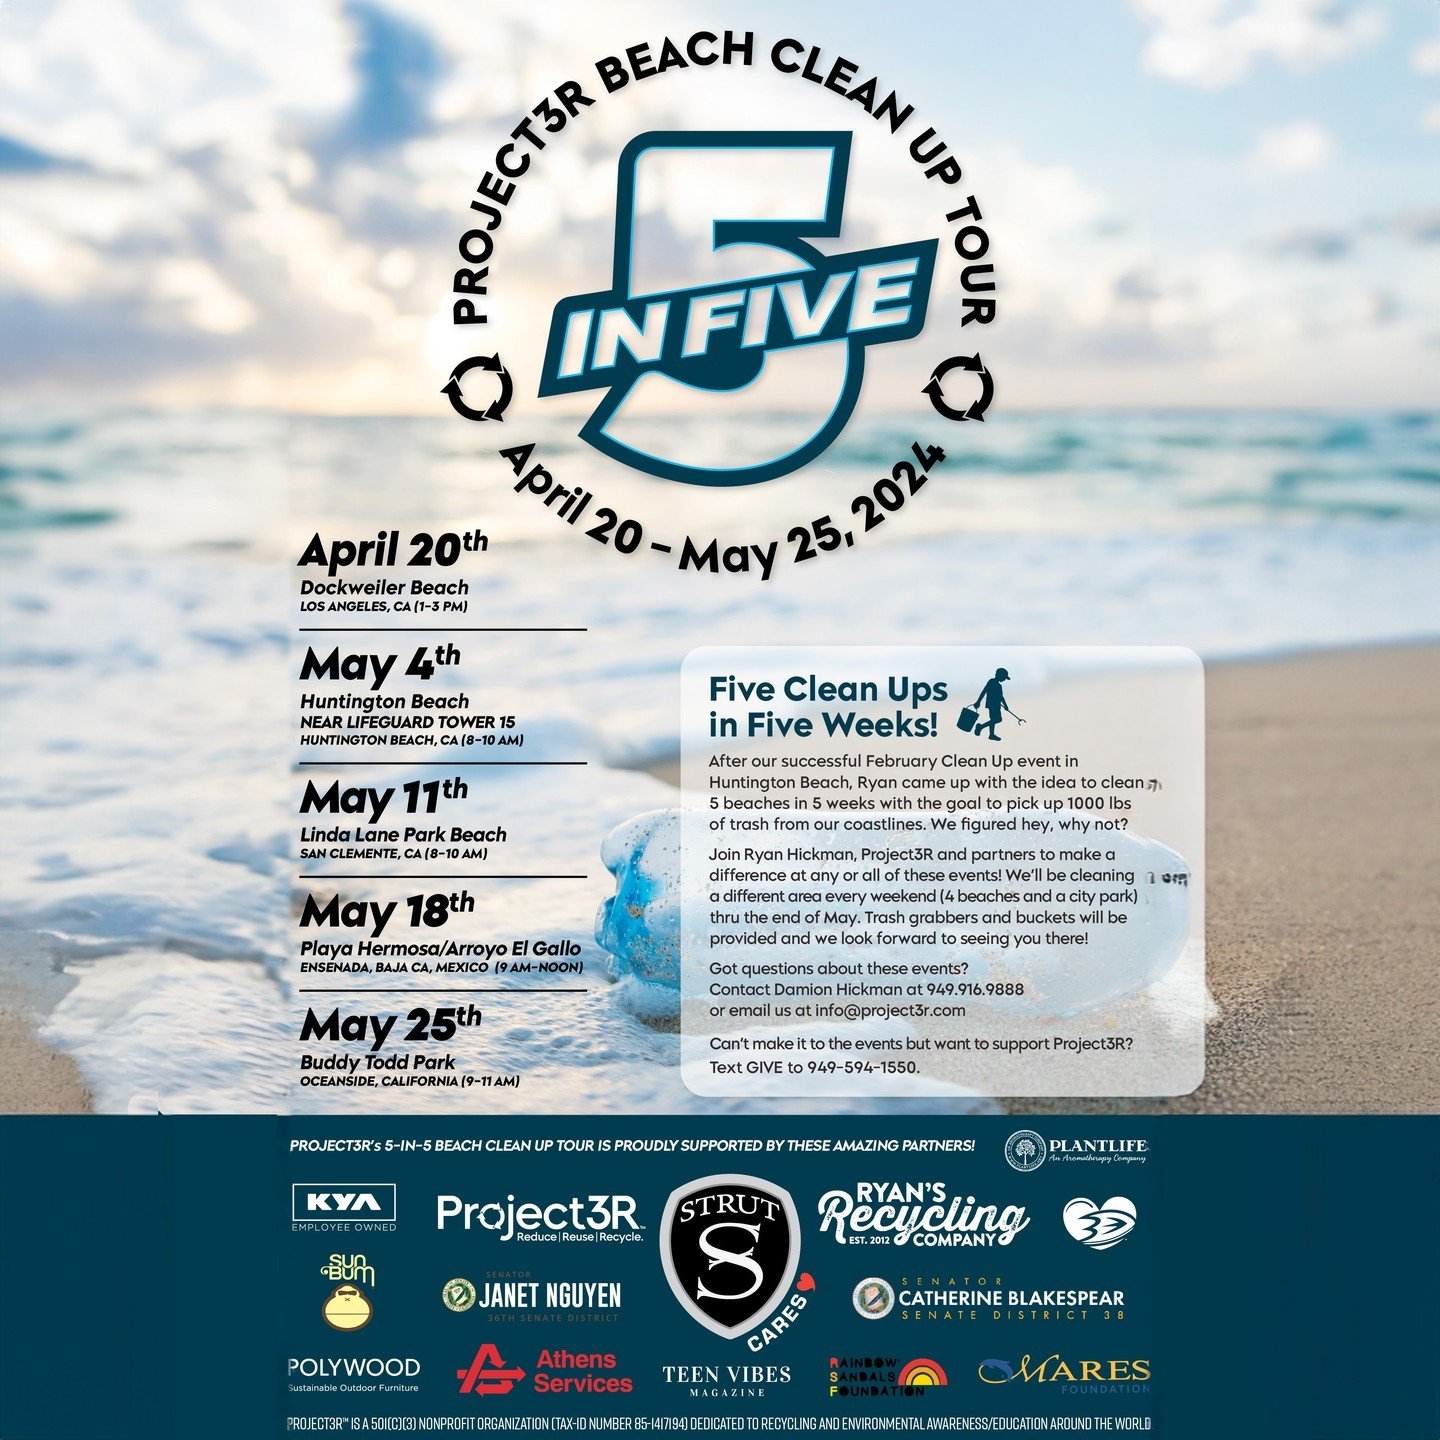 There are only two stops left for the 5in5 Beach Clean-Up Tour! Our team has had a blast in the past few stops - cleaning our beaches and leaving them better than we found them. If you can't make it this weekend, join us on the 25th in Oceanside - to